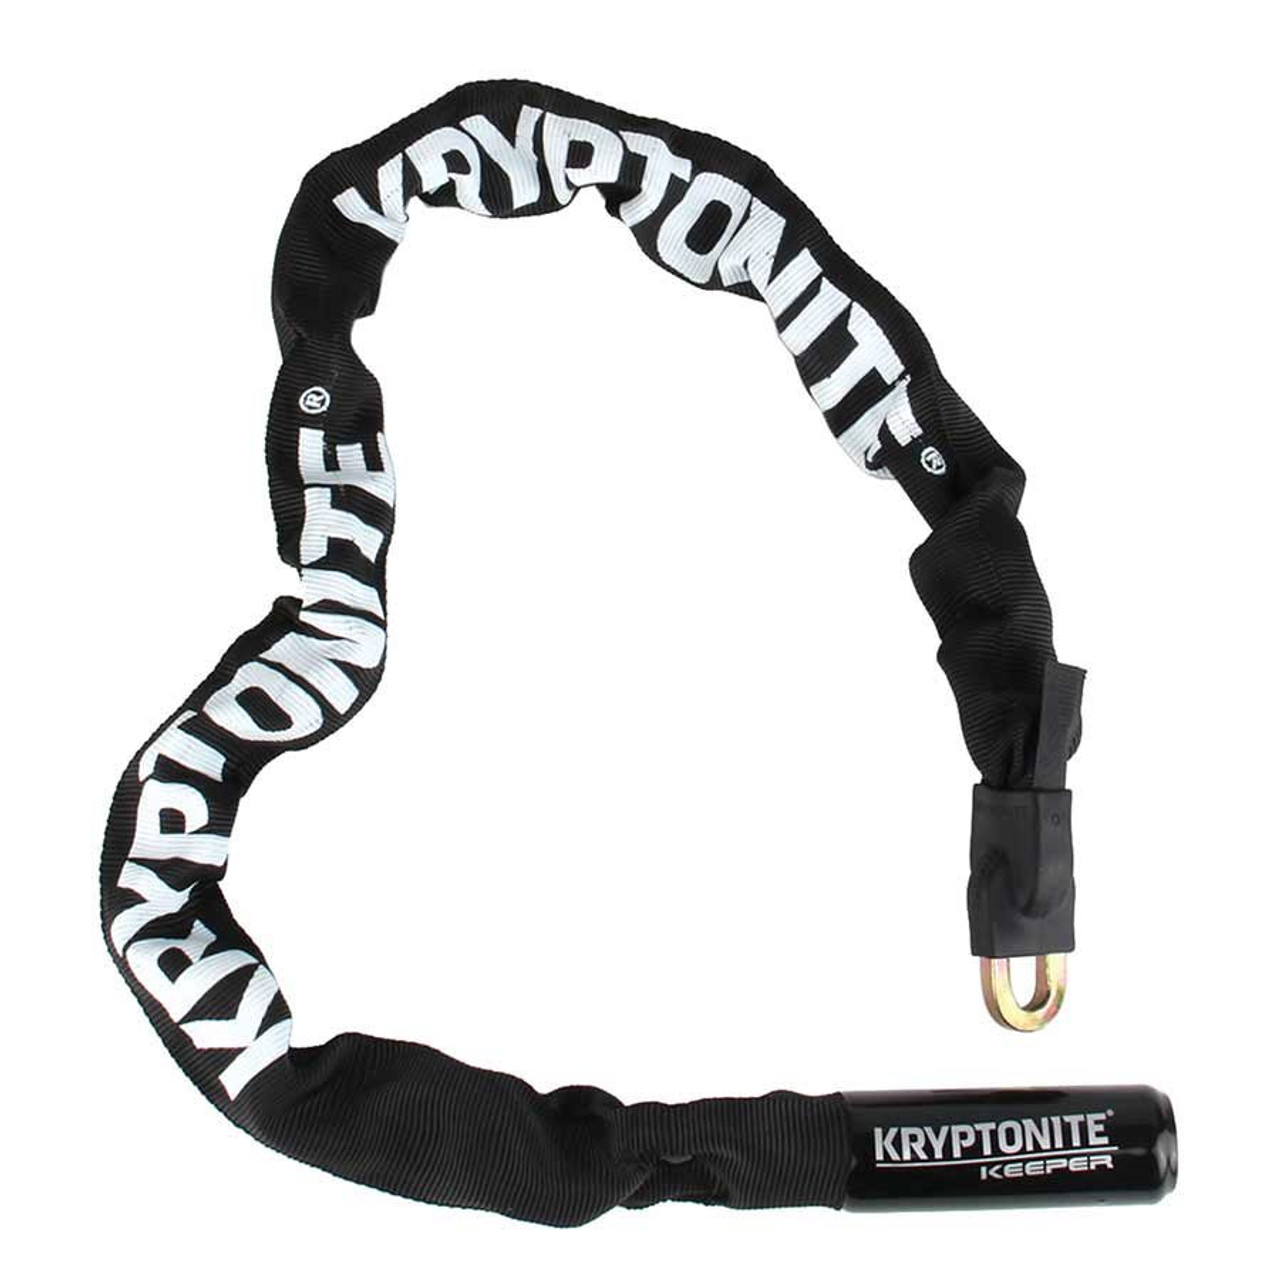 Kryptonite Keeper 785 high level protection affordable price